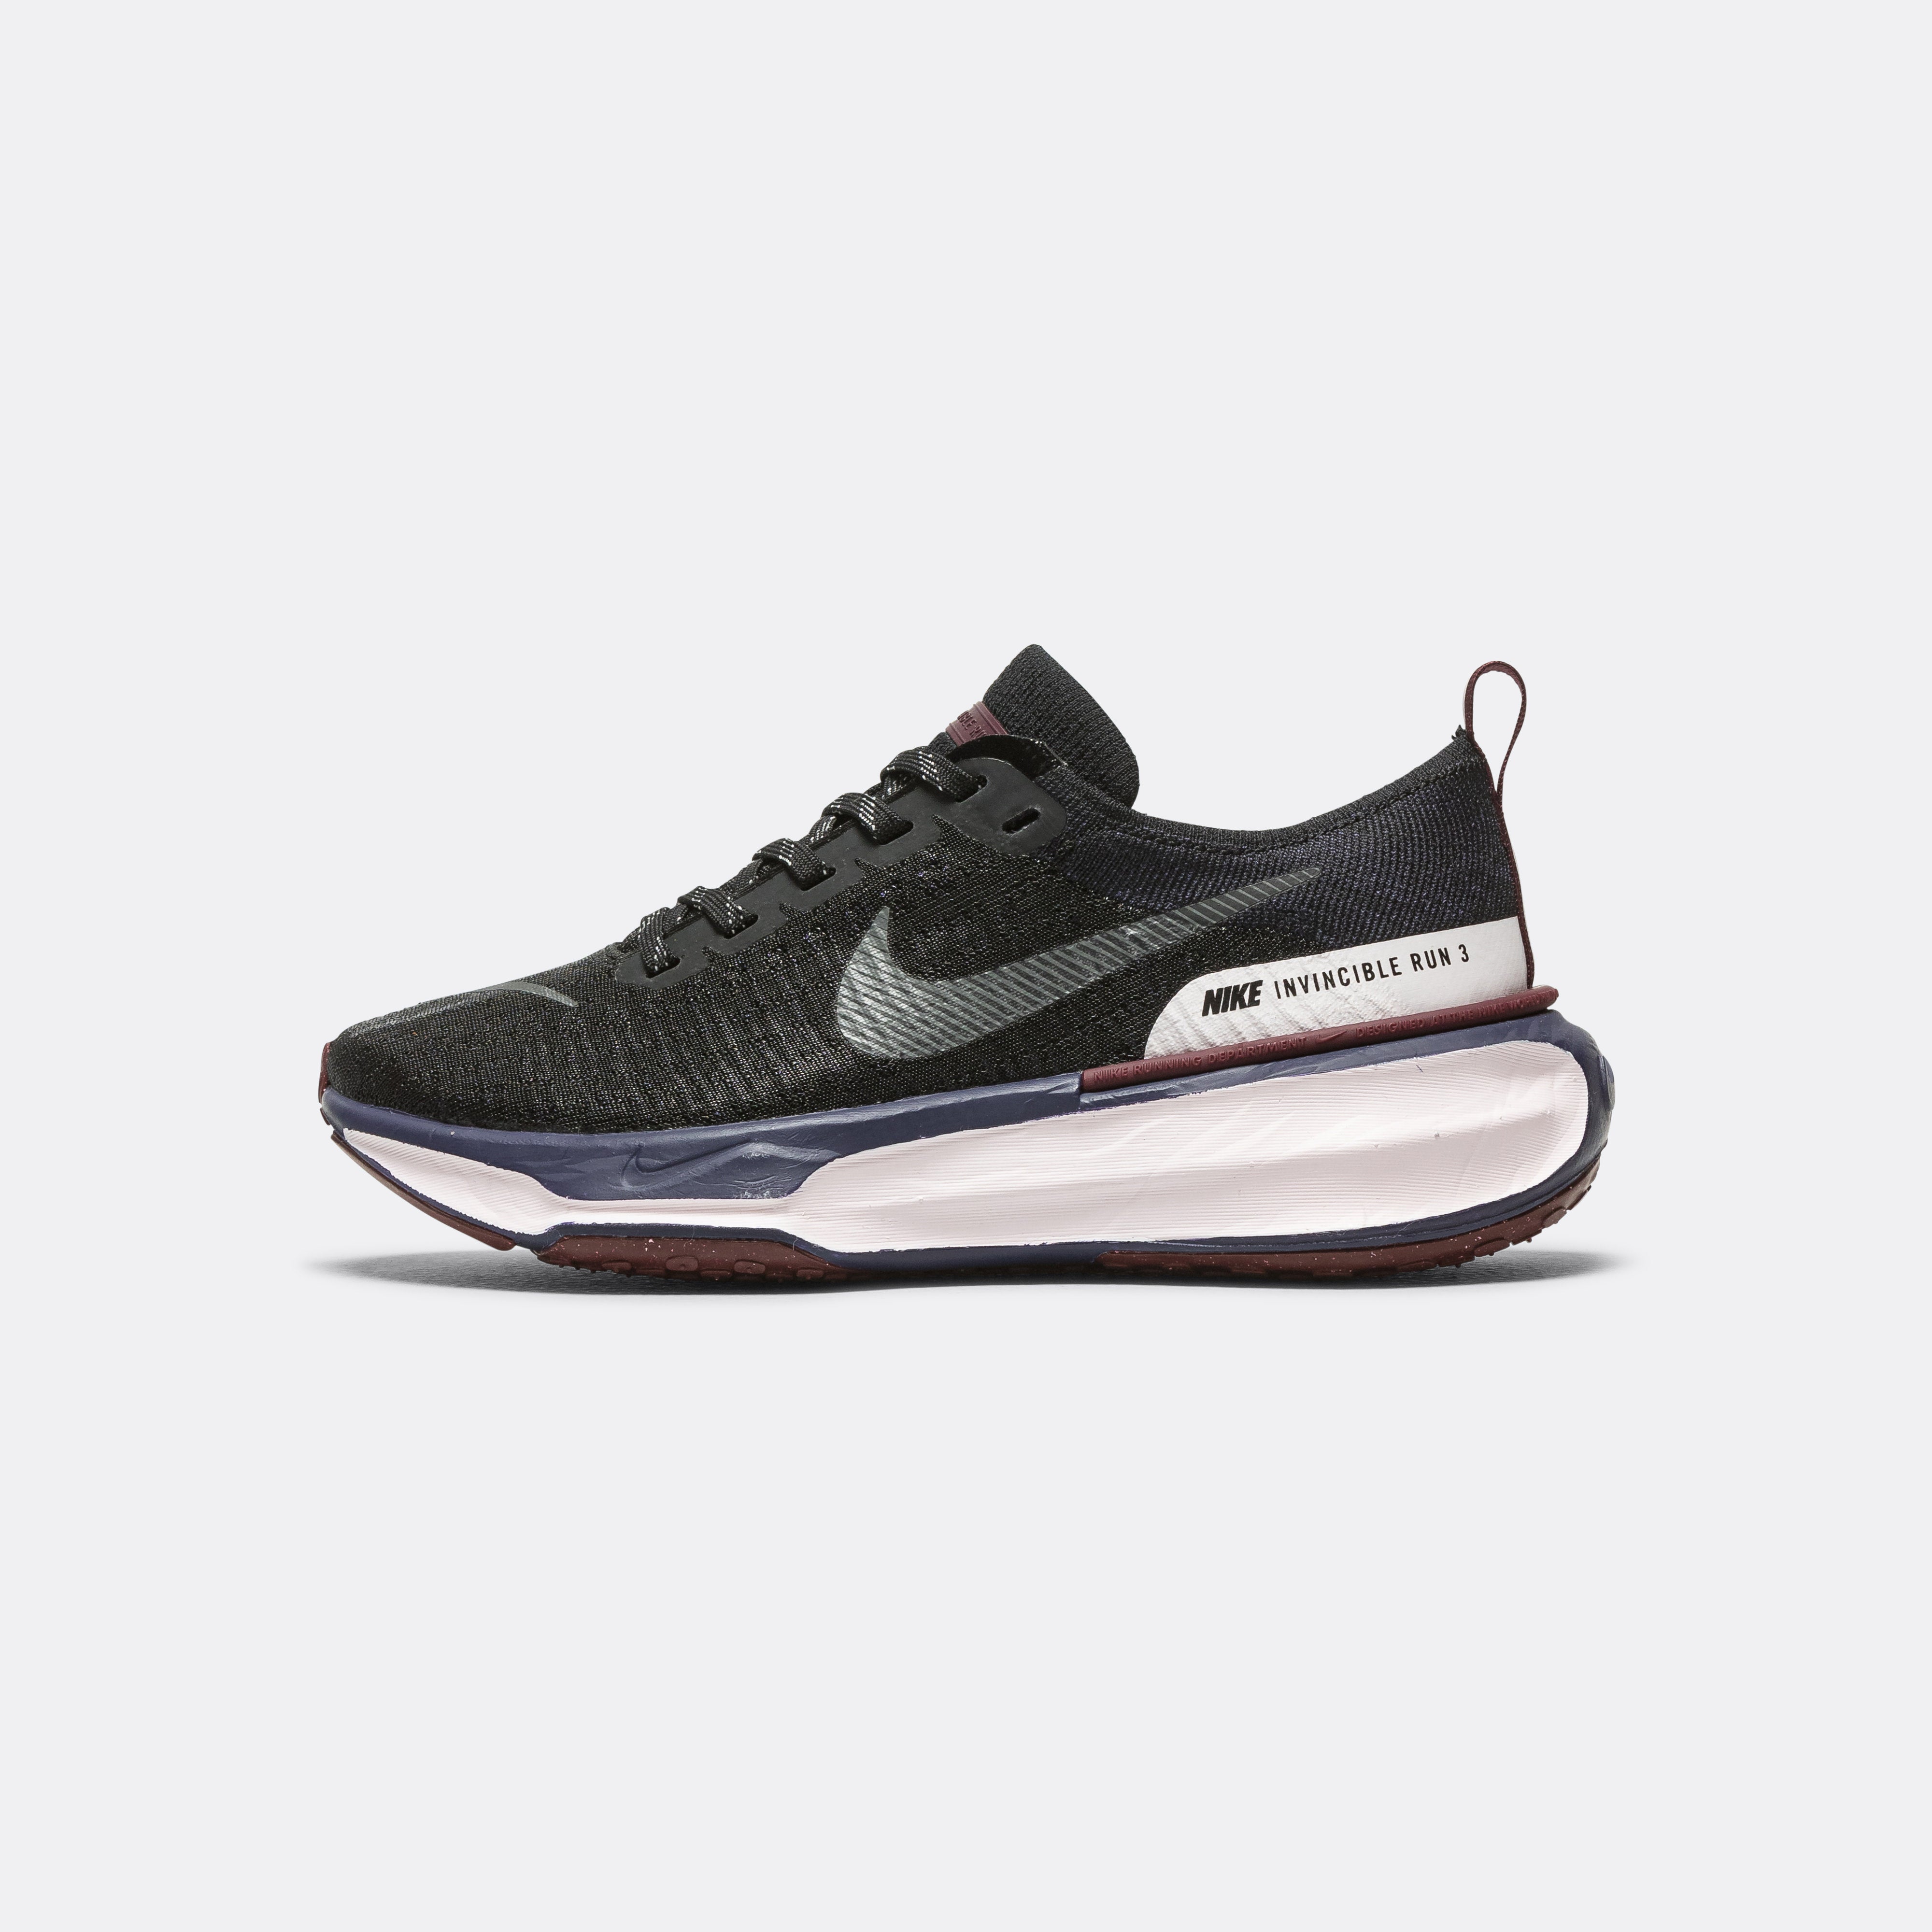 Nike Womens ZoomX Invincible Run FK3 - Black/Iron Grey | Up There